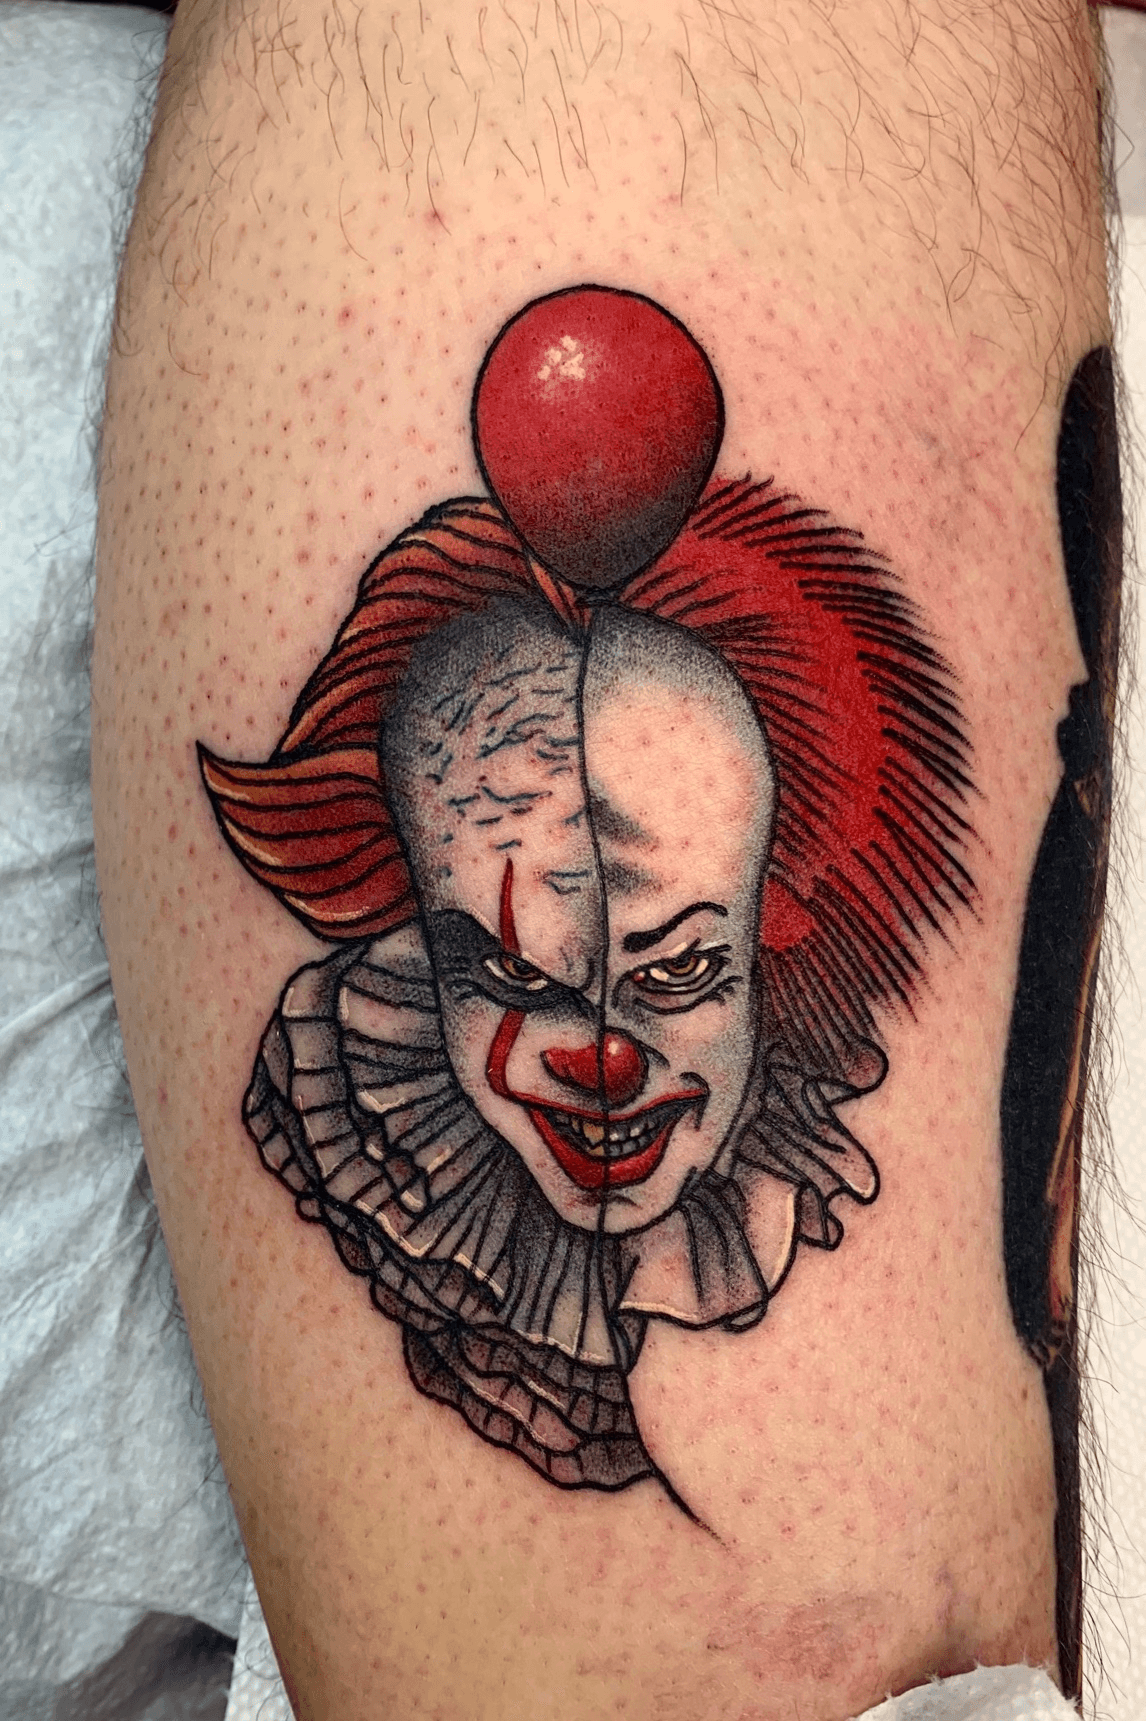 Tattoo uploaded by Davey Graham  New Pennywise versus old pennywise  traditional style split design turned out pretty fun on a horror leg sleeve  in progress Bit by bit  Tattoodo